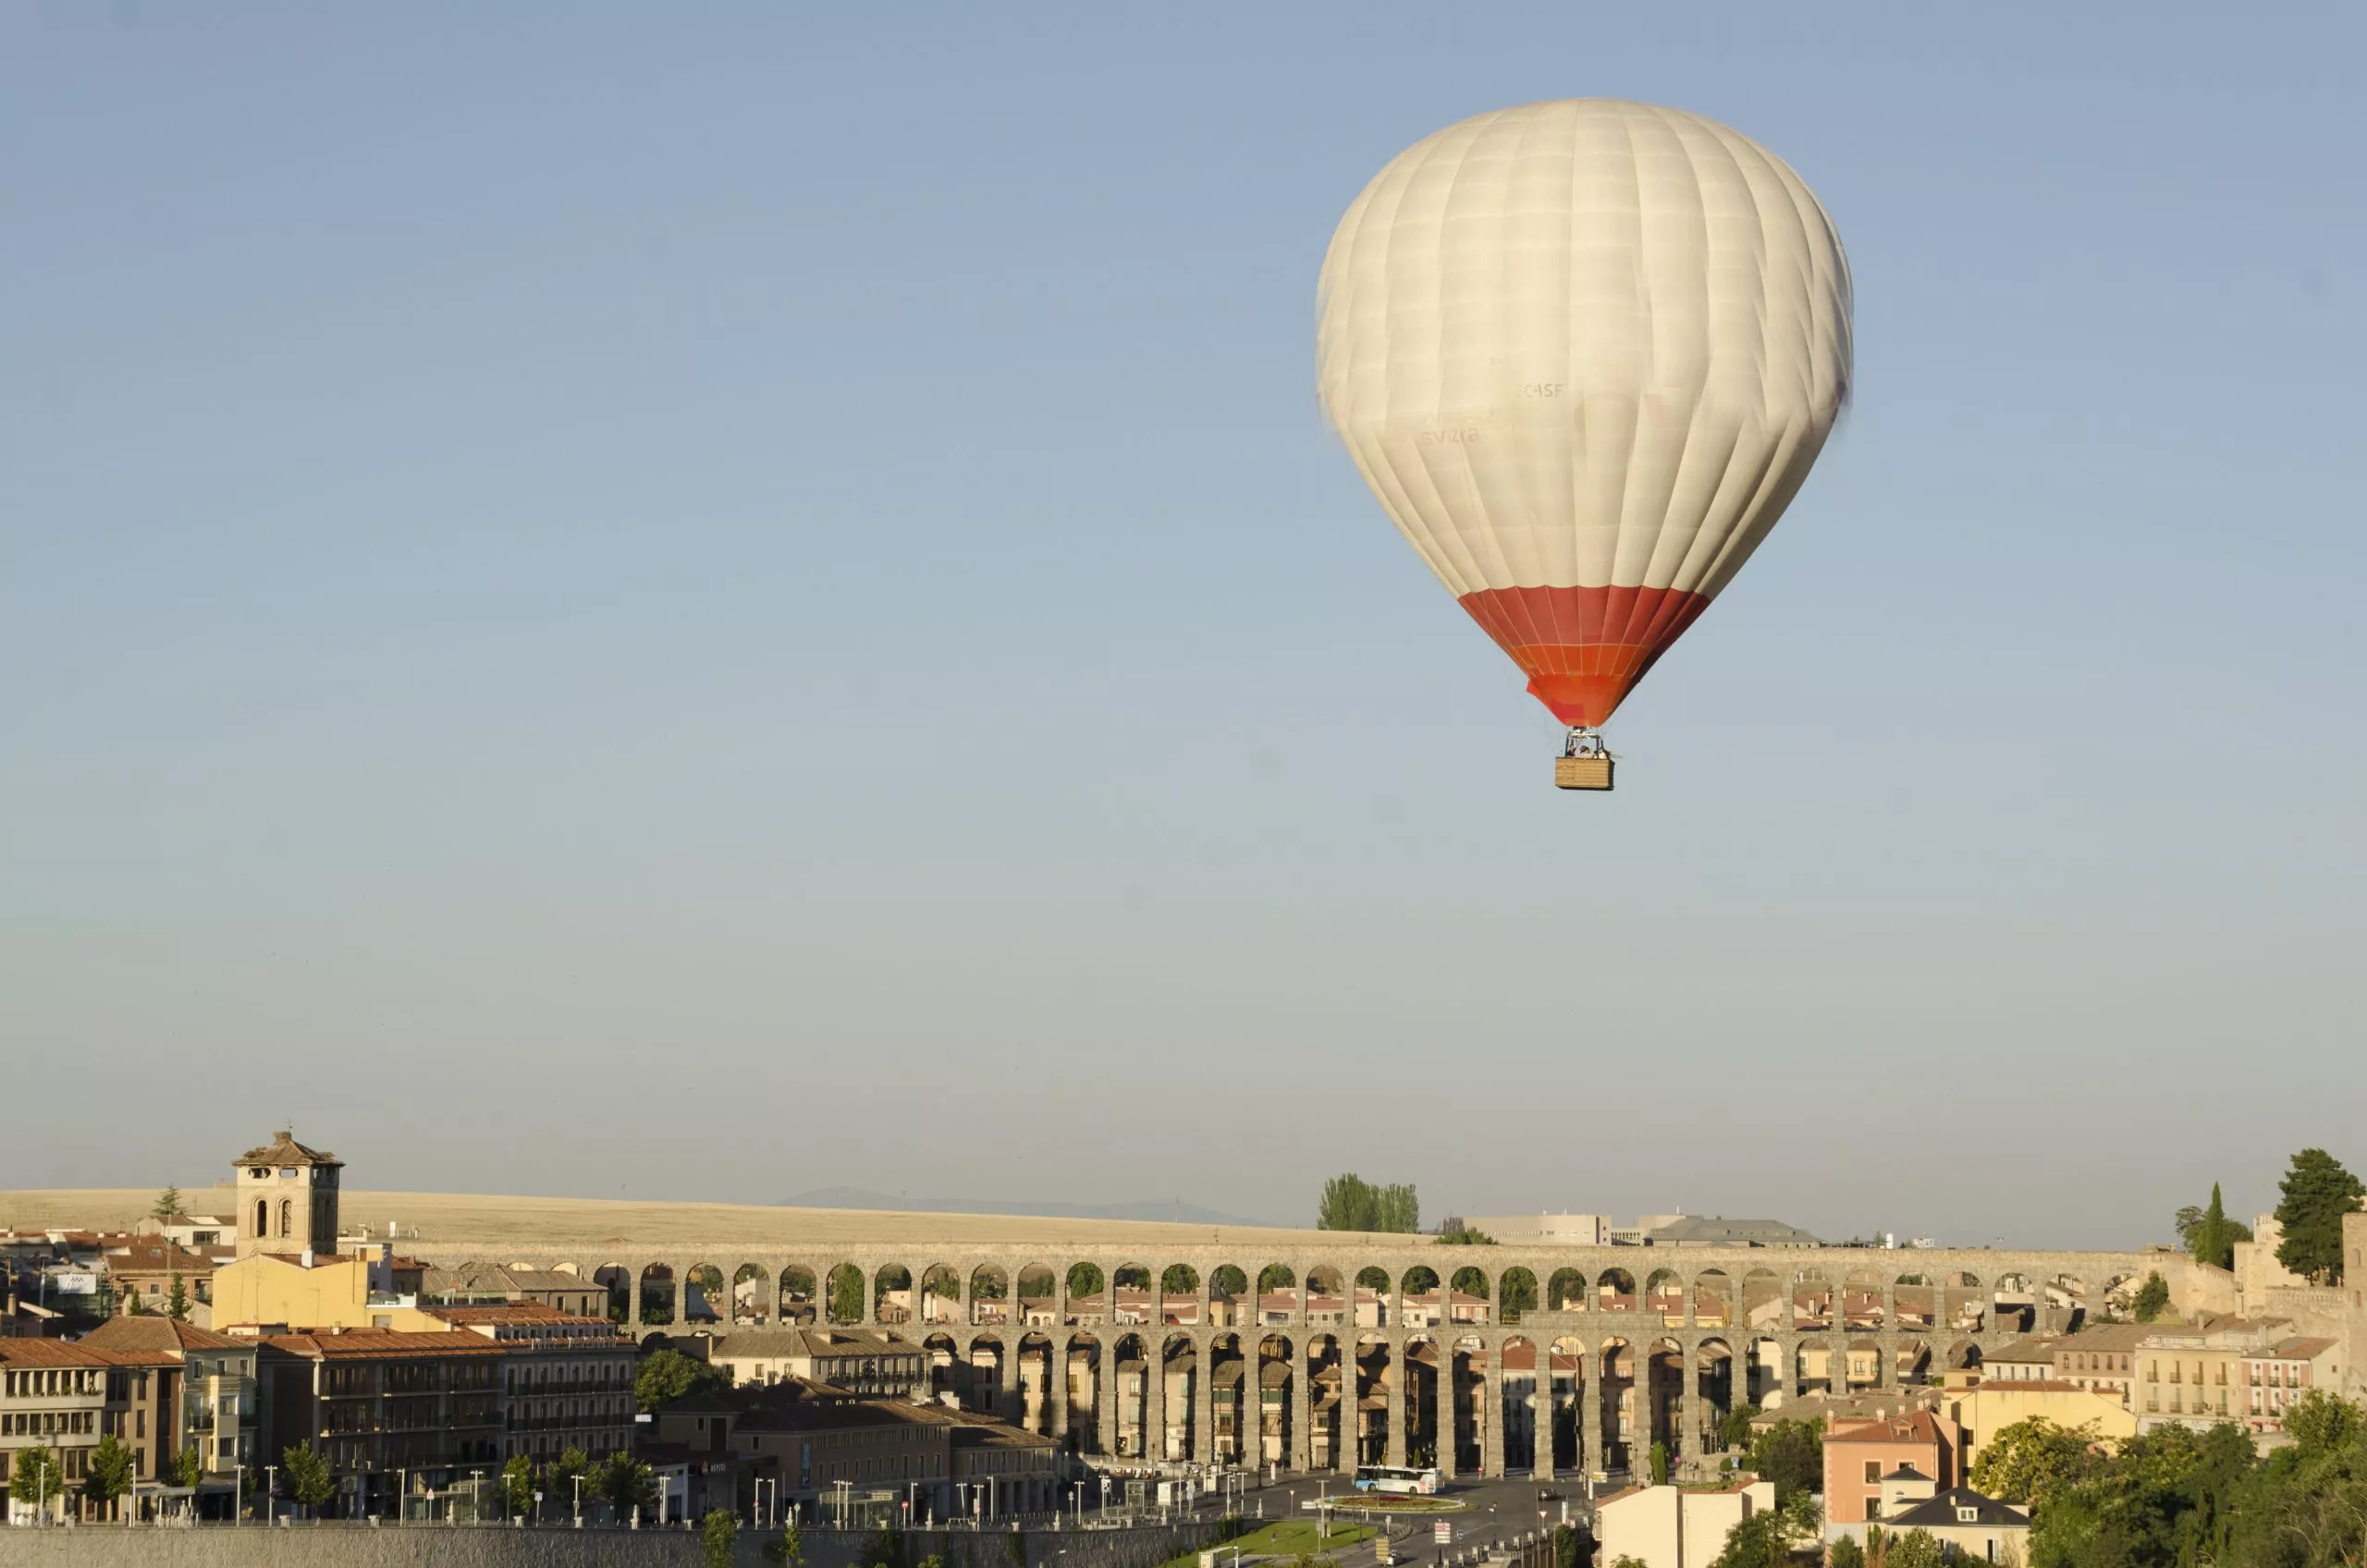 Segovia is a World Heritage Site since 1985. Segovia from the air to appreciate all the historical monuments from a bird's-eye view, its people and its gastronomy because from the air, everything is possible.